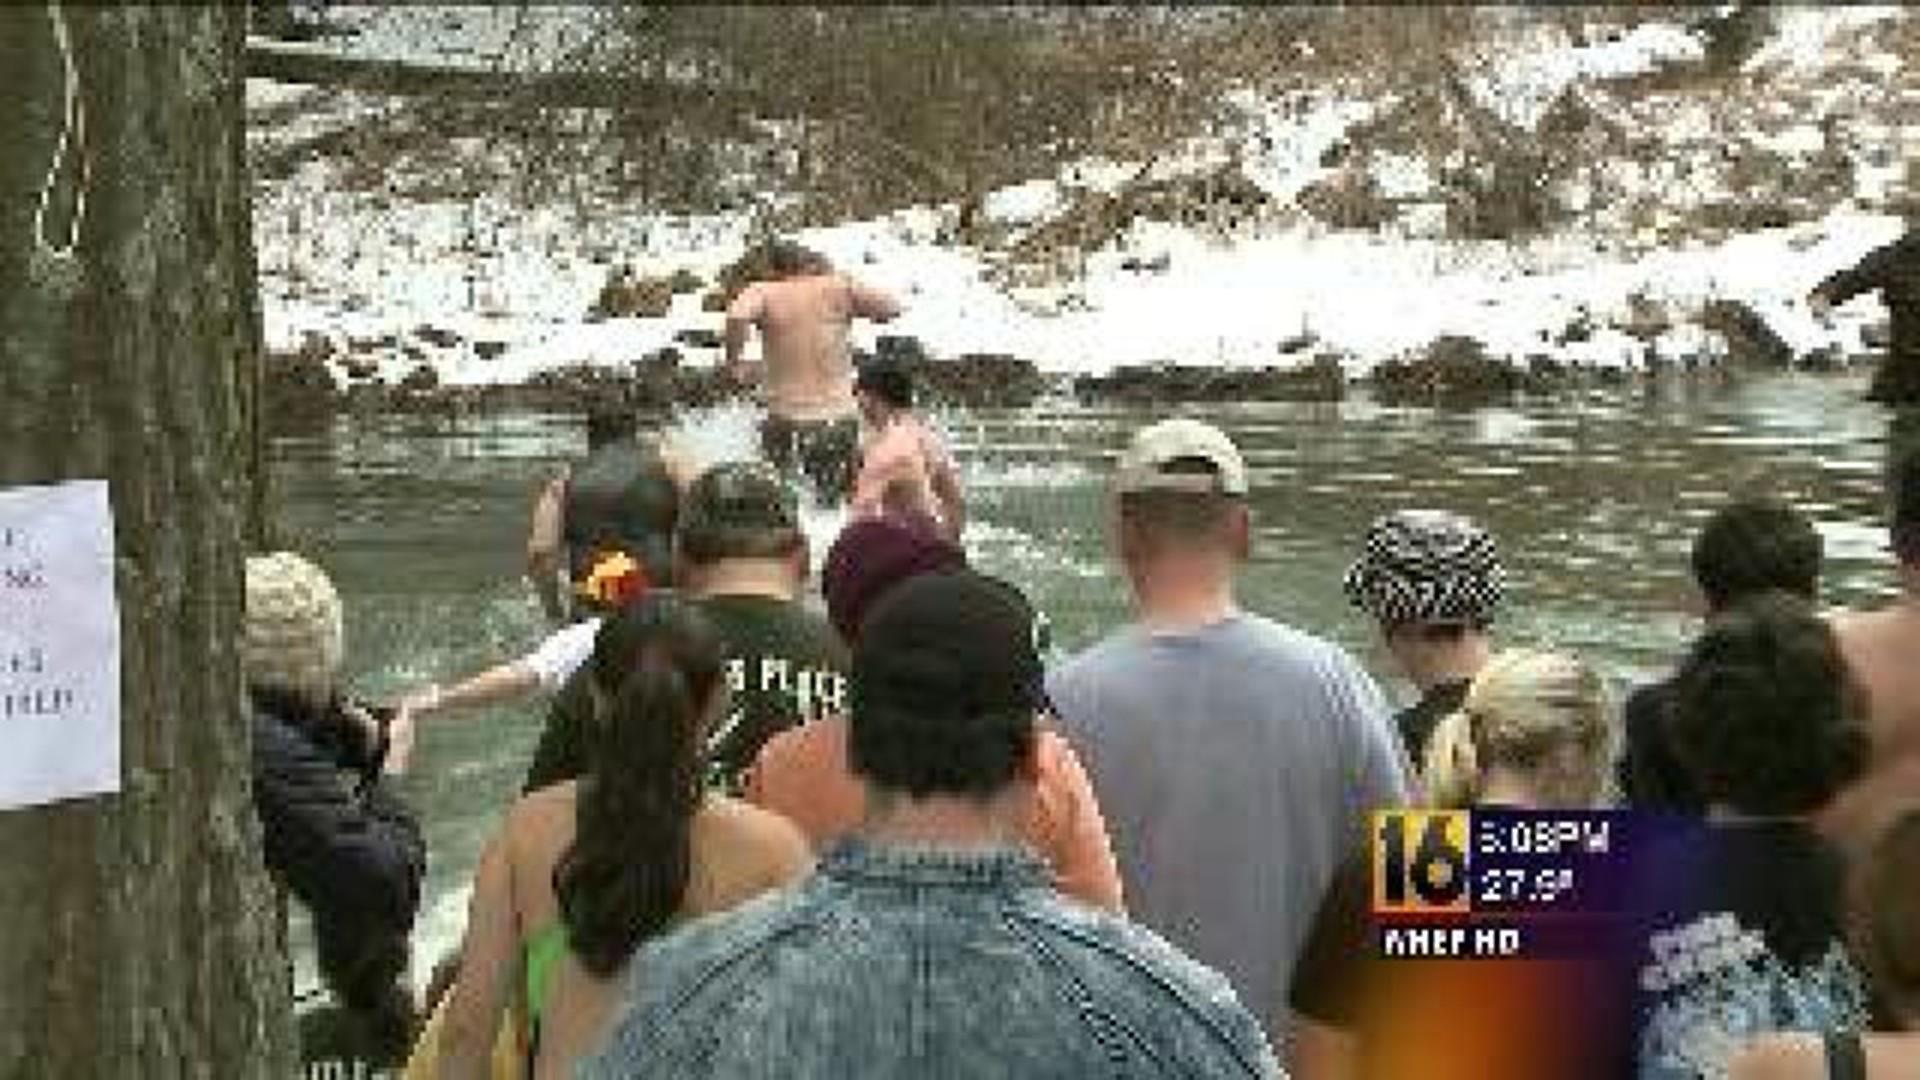 Dozens Take Icy Plunge For Good Cause